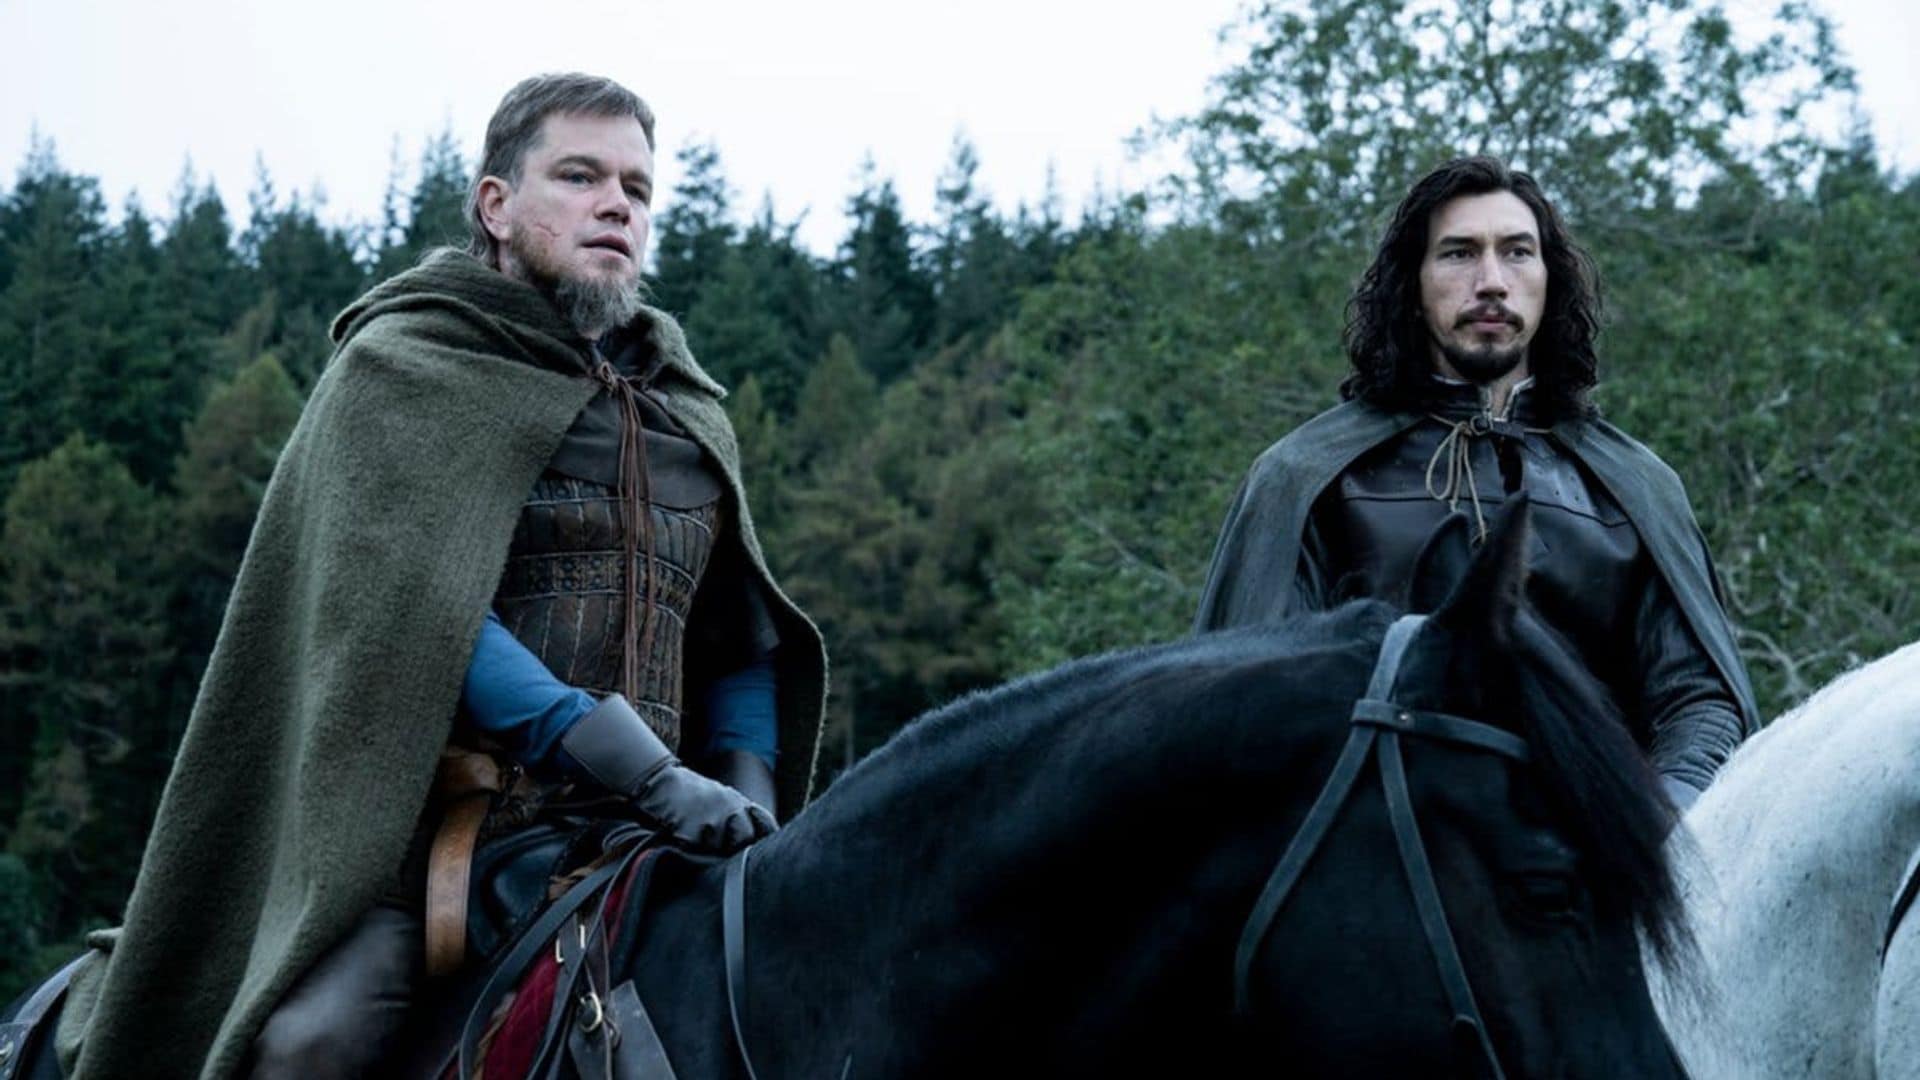 Ben Affleck and Matt Damon talk about making ‘The Last Duel’ and working with Ridley Scott